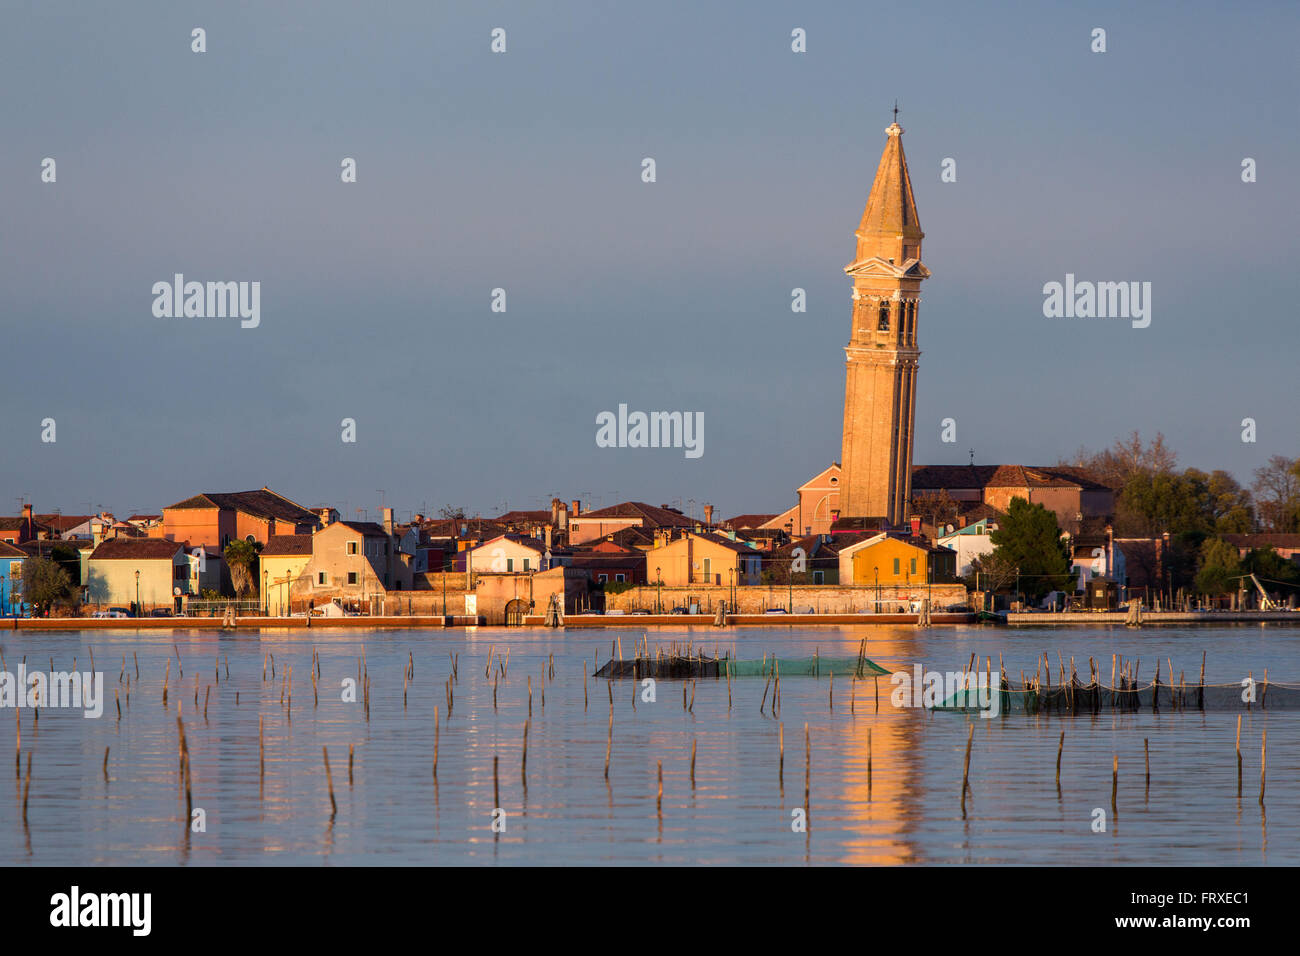 Venetian Lagoon with the Island of Burano and leaning tower, Fishing village with colourful house facades, Veneto, Italy Stock Photo